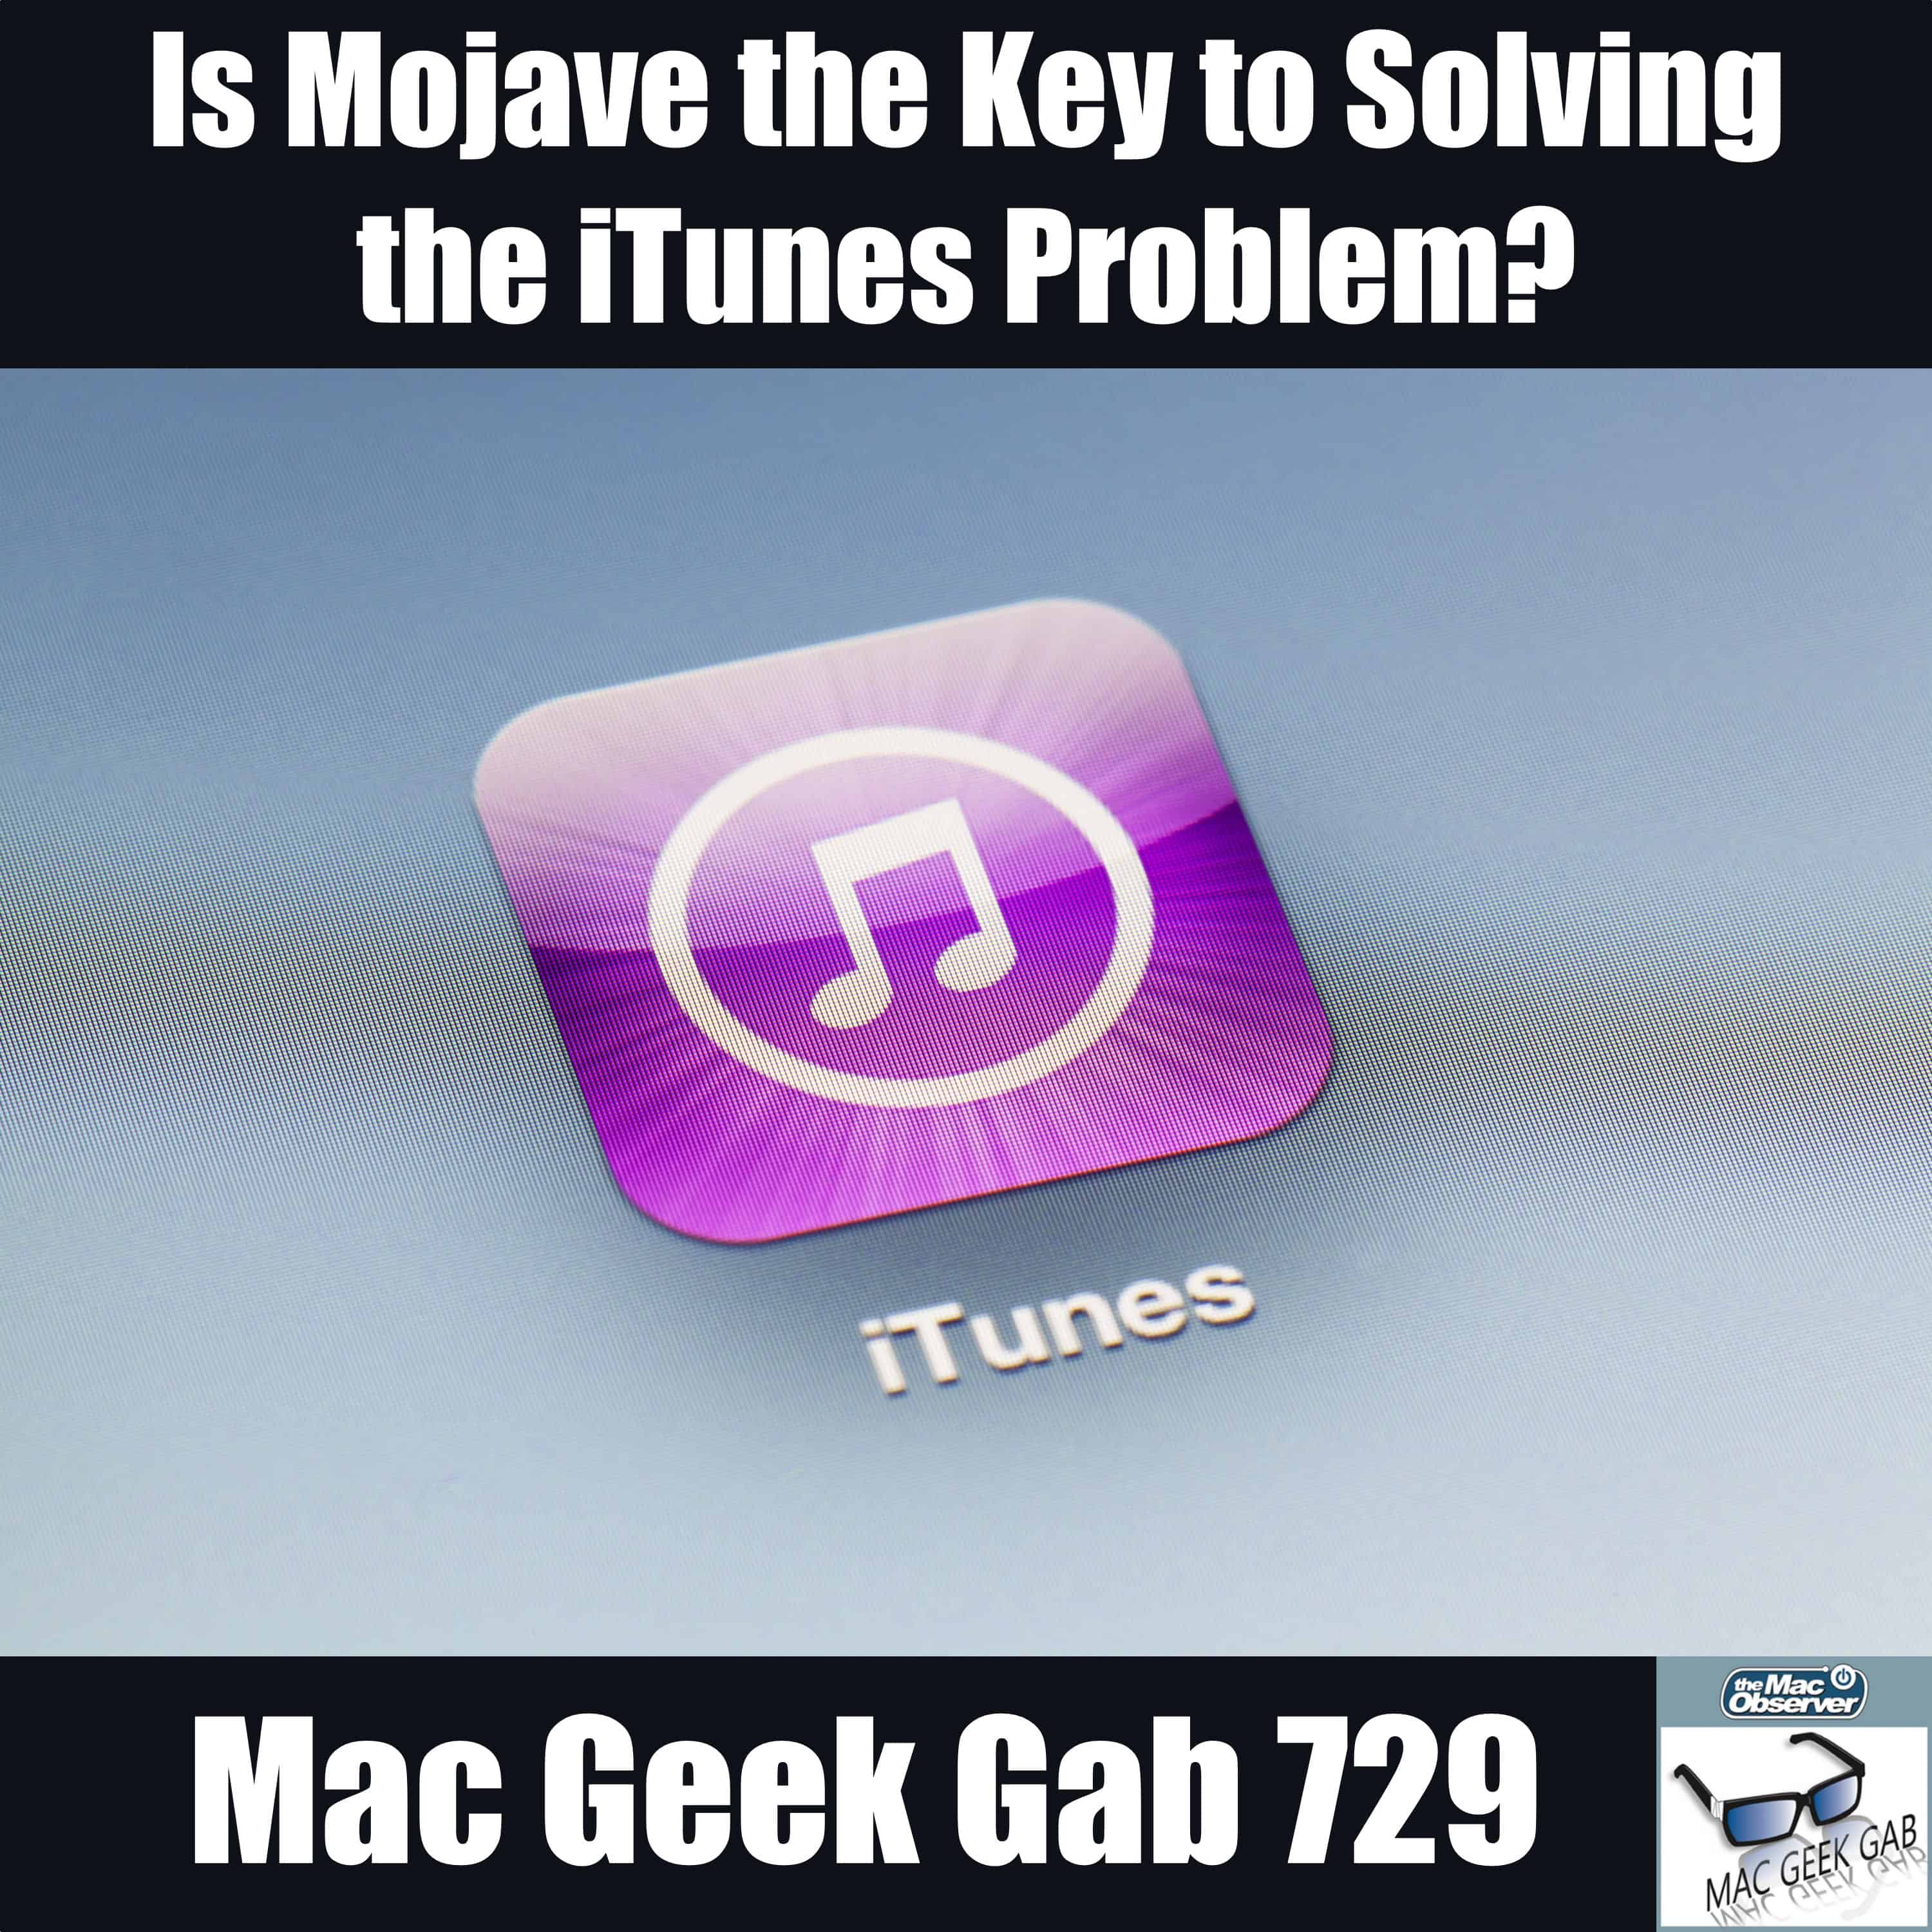 Is Mojave the Key to Solving the iTunes Problem? – Mac Geek Gab Podcast 729